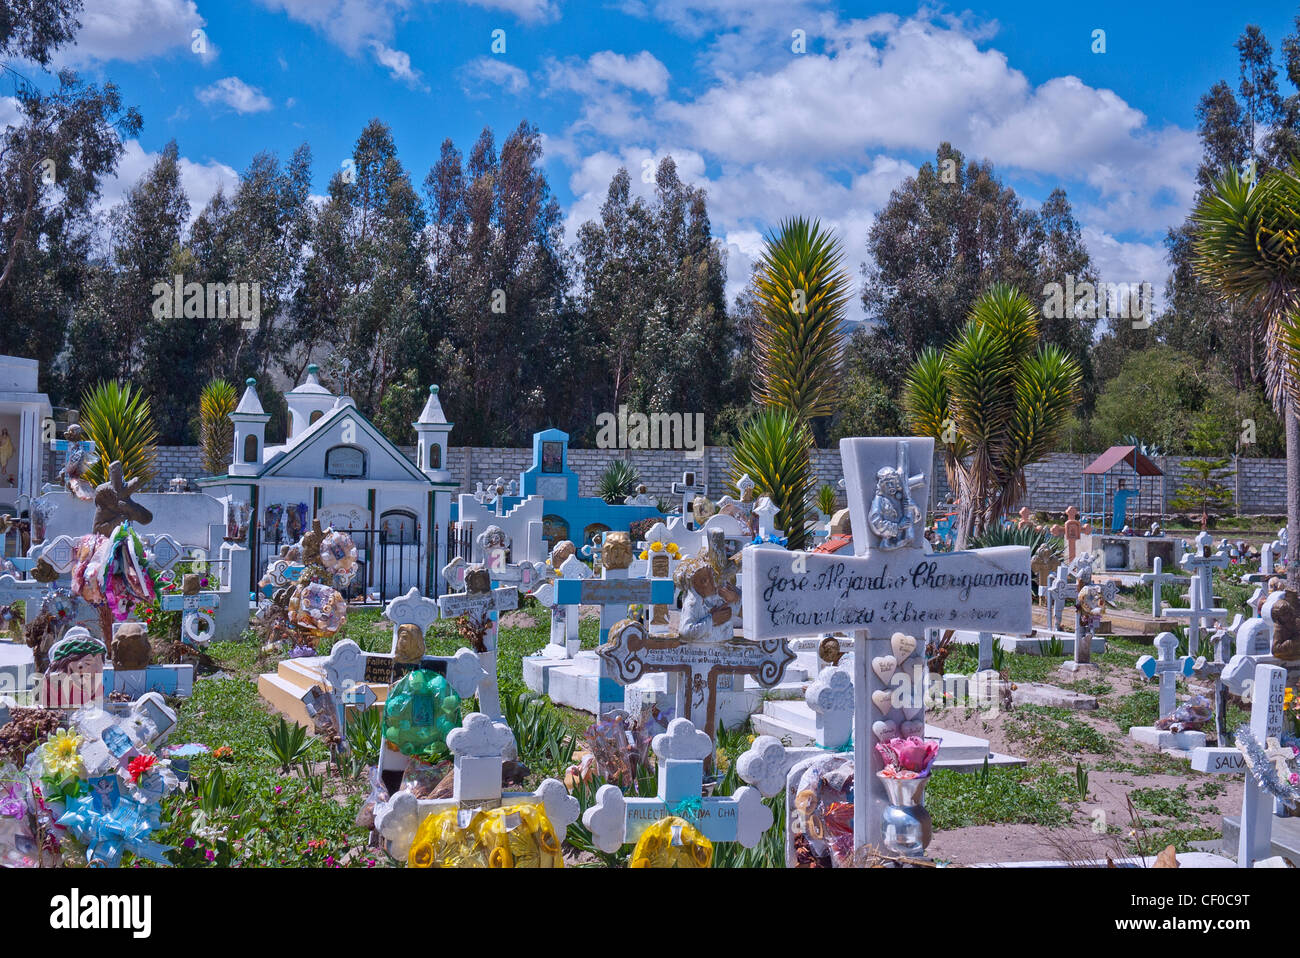 A traditional Ecuadorian cemetery located on the Quilotoa Loop in the Andes Mountains of Ecuador. Stock Photo